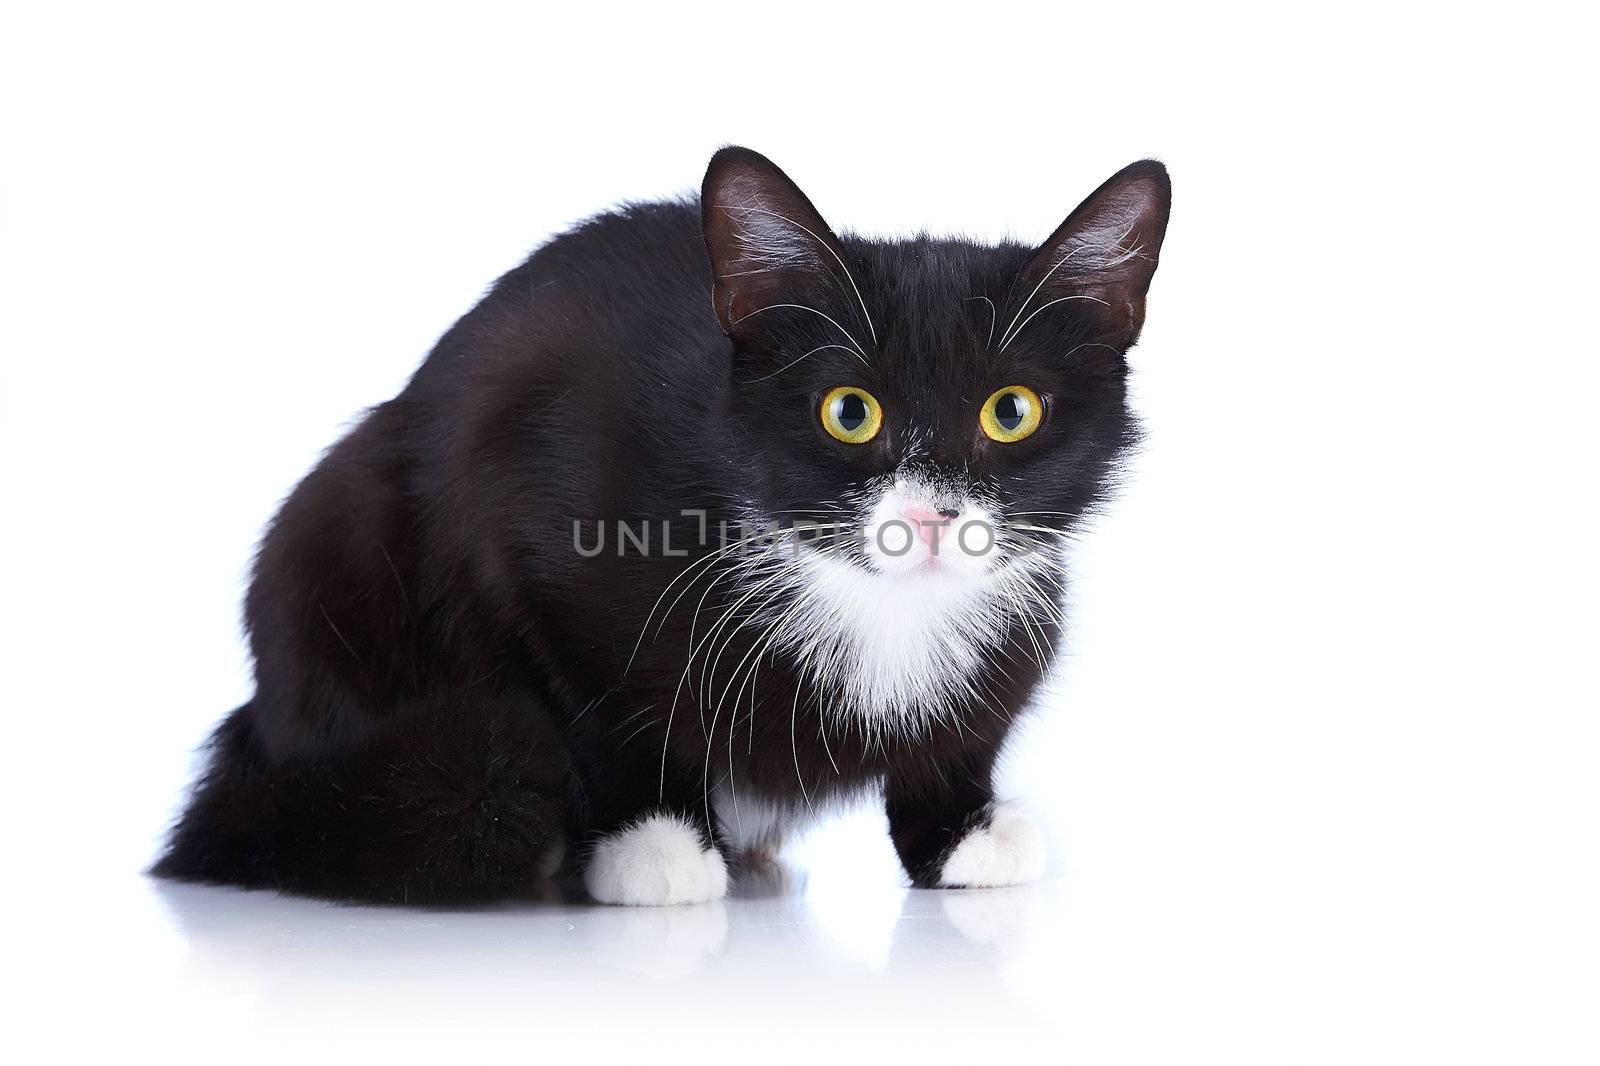 Black-and-white cat. Cat with yellow eyes. Cat on a white background. Black cat. House predator. Small predatory animal.